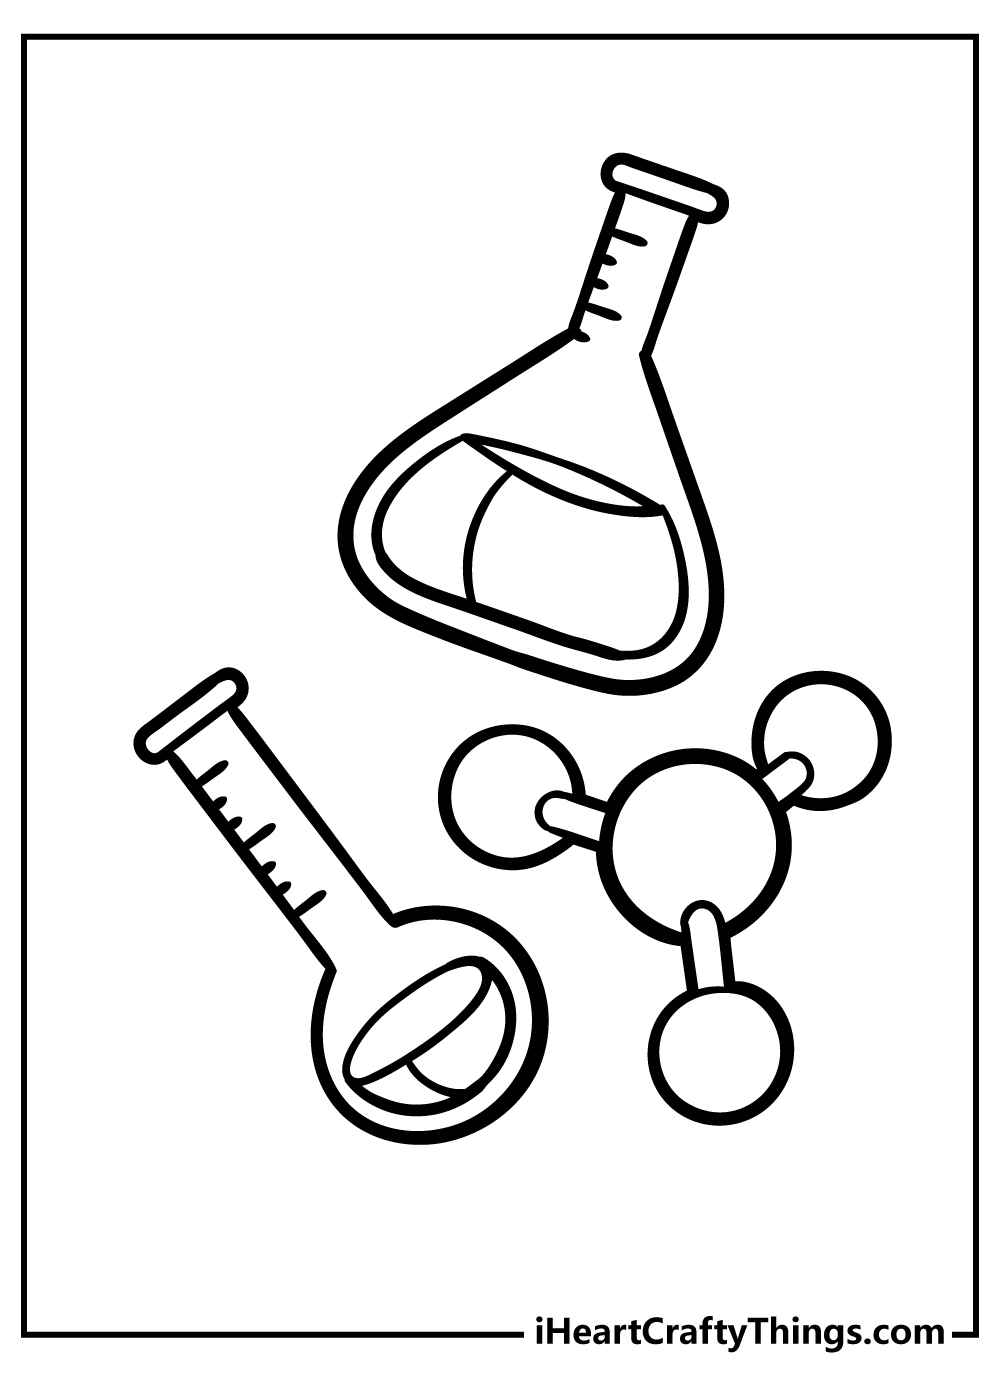 Science Coloring Pages for adults free printable